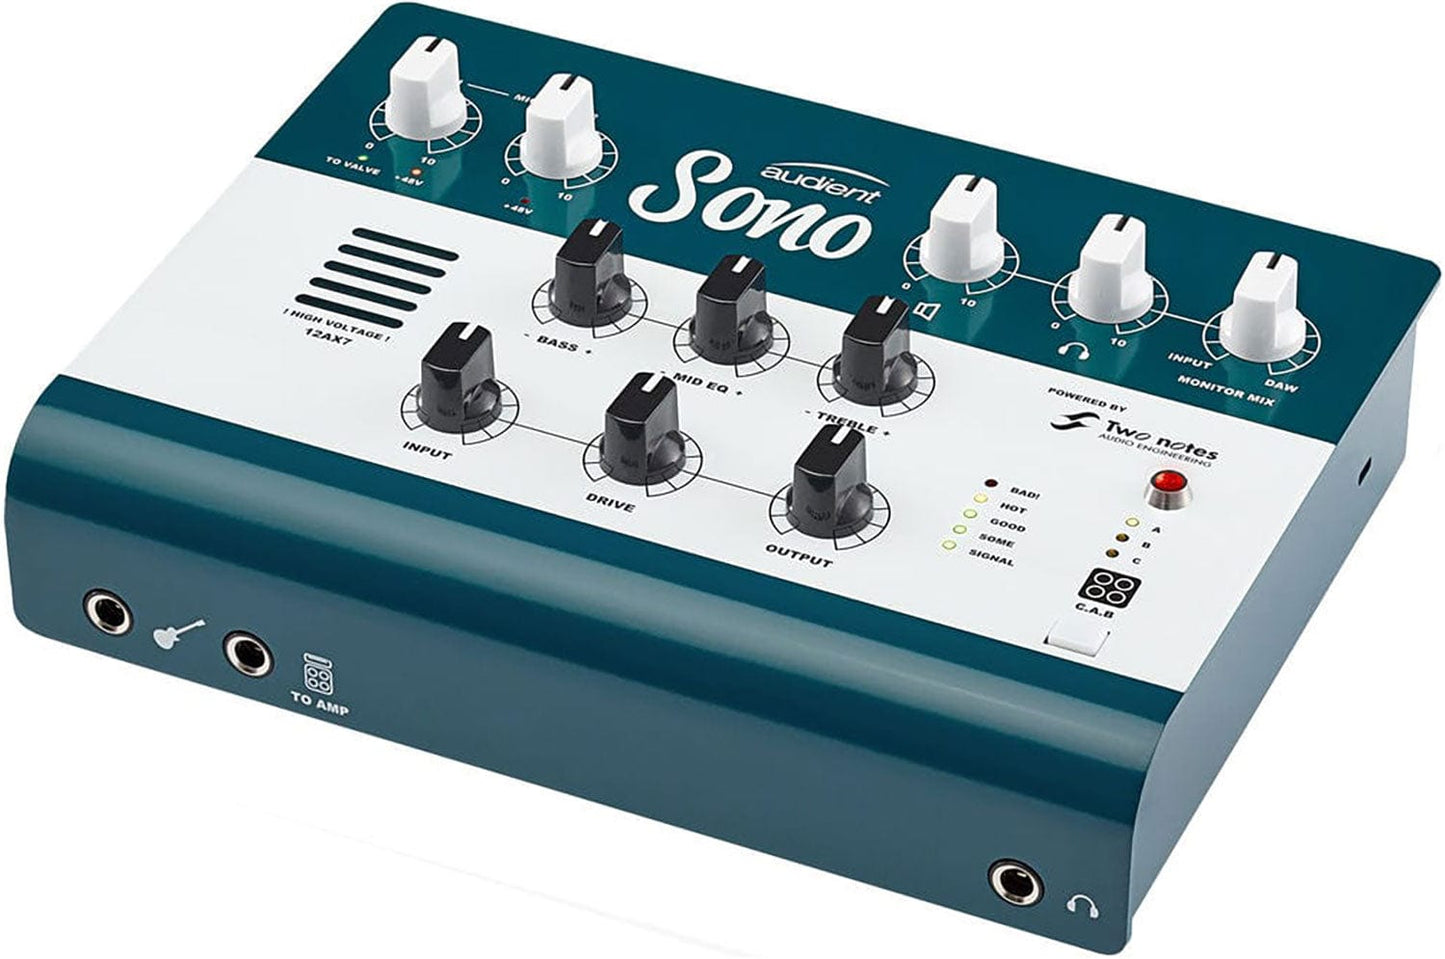 Audient SONO Ultimate Audio Interface For Guitarists - PSSL ProSound and Stage Lighting